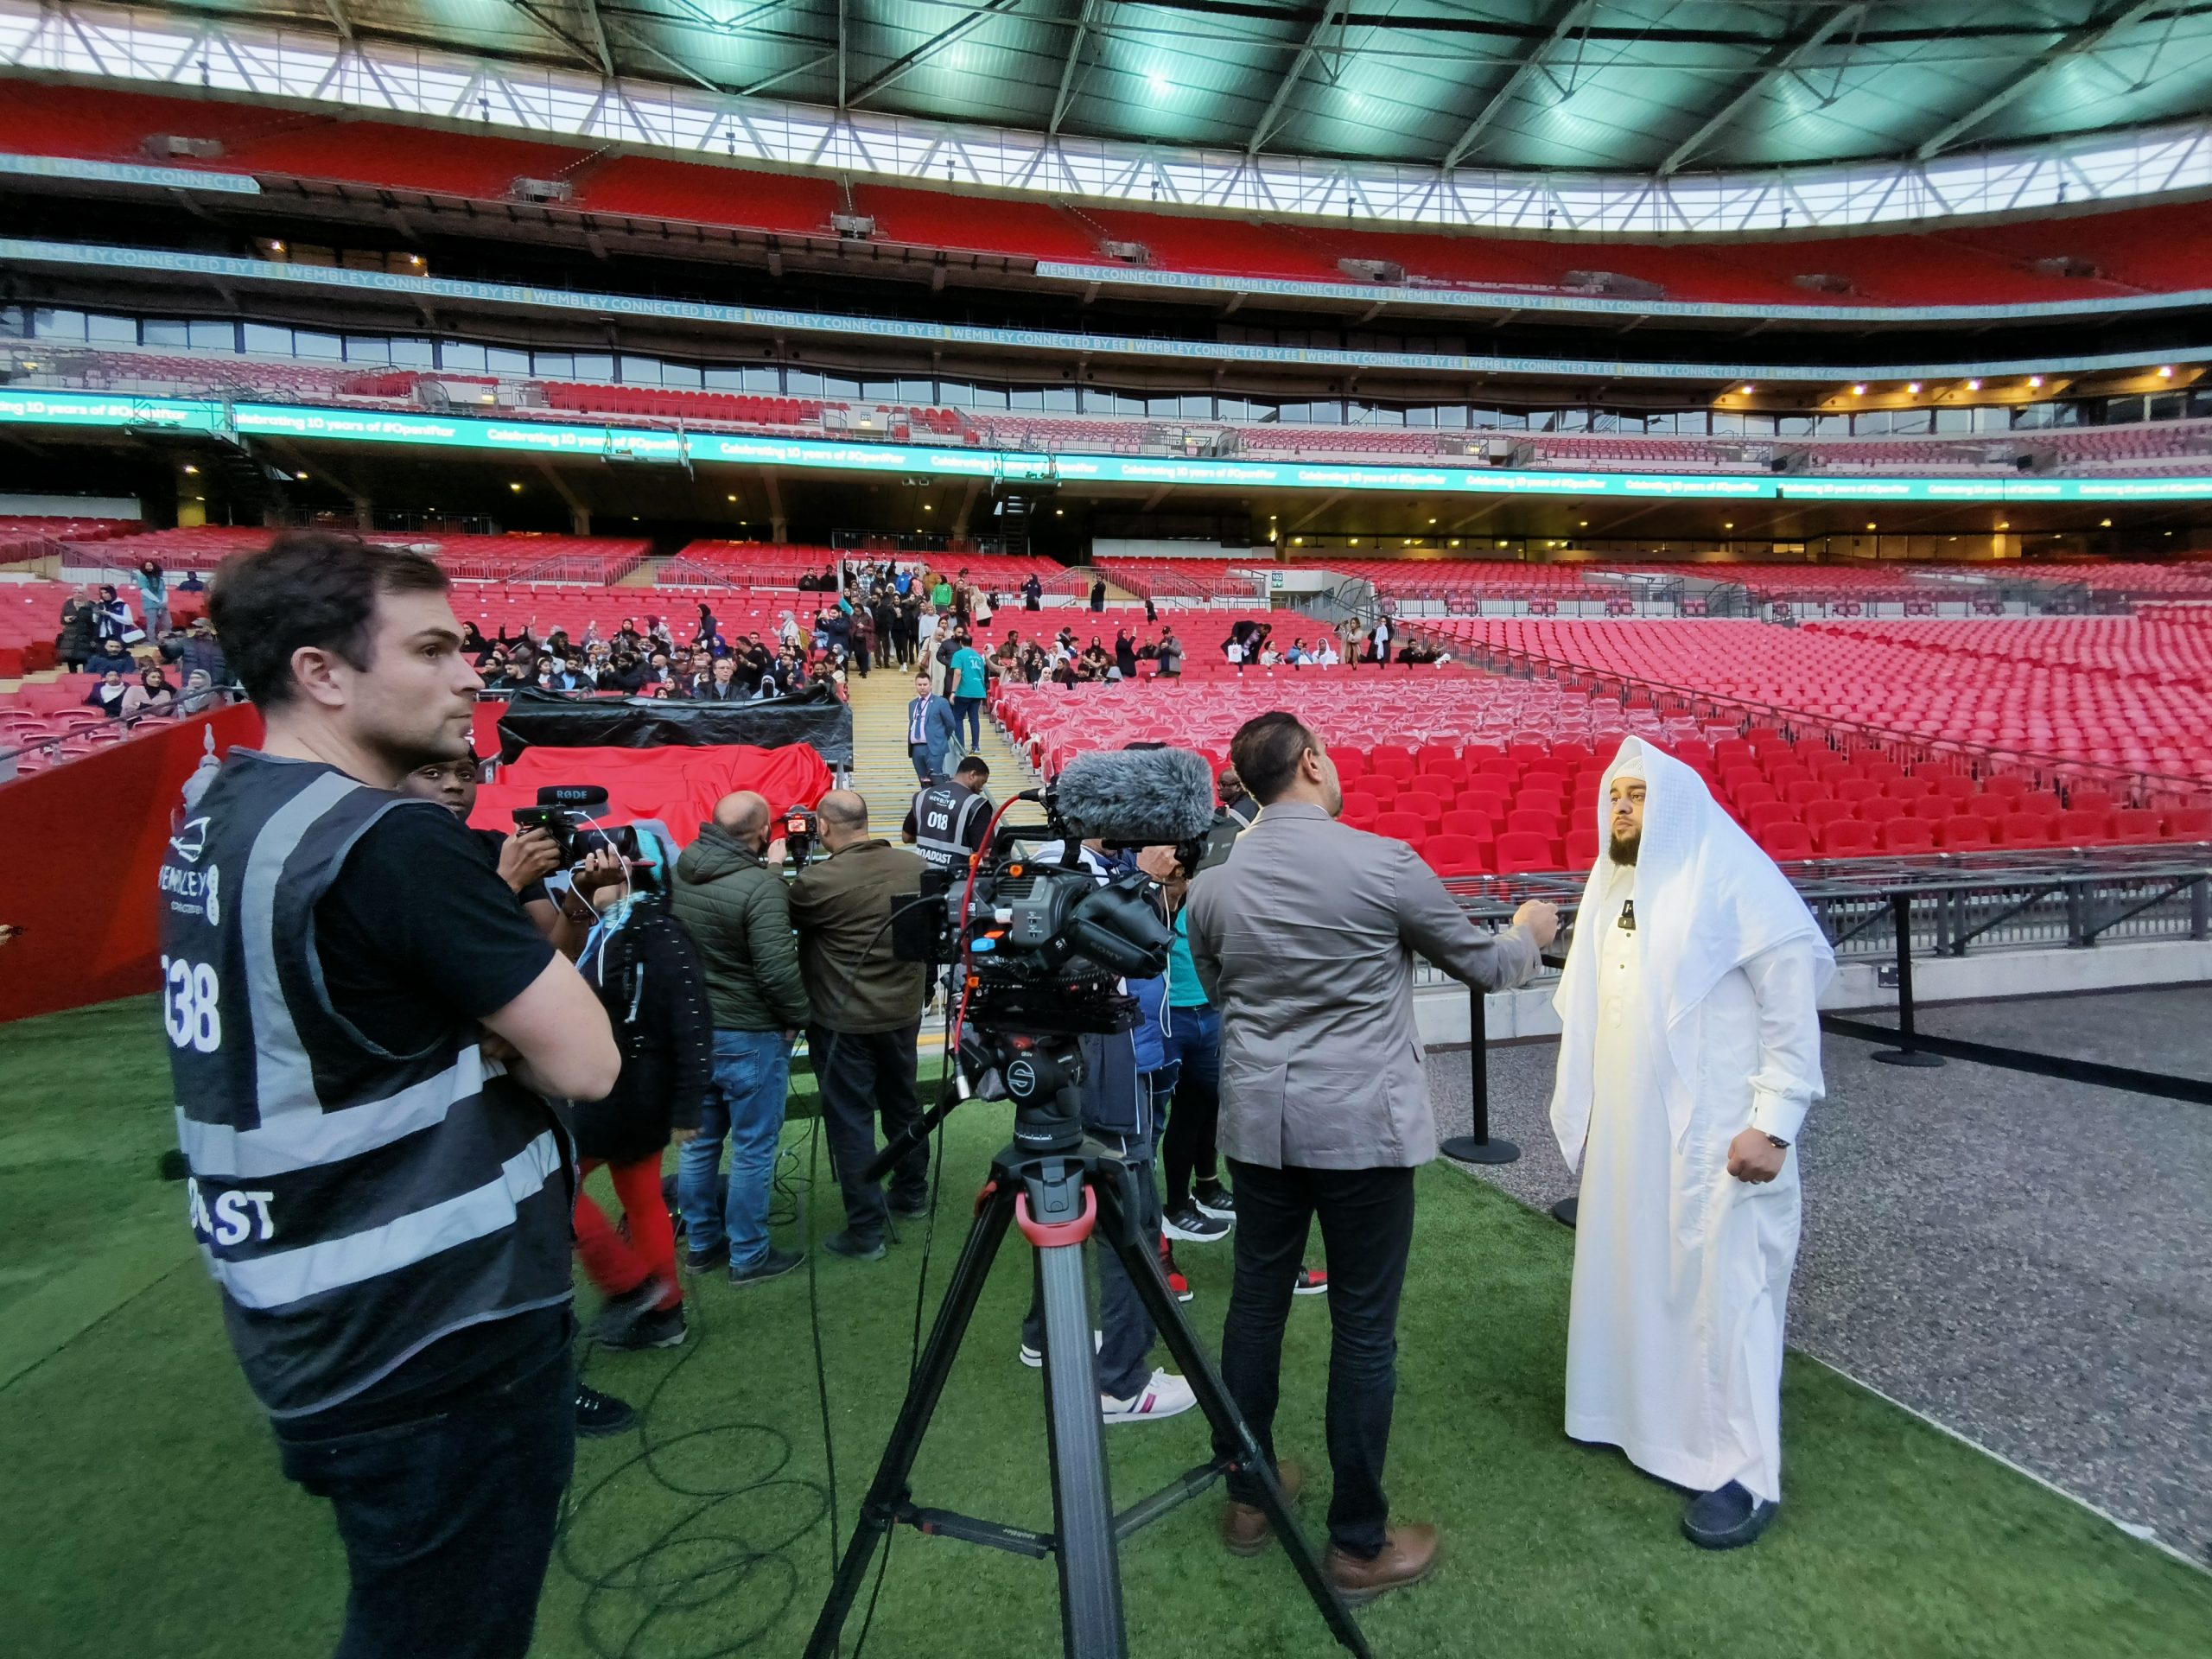 Hundreds Gather for Open Iftar at Wembley Stadium - About Islam